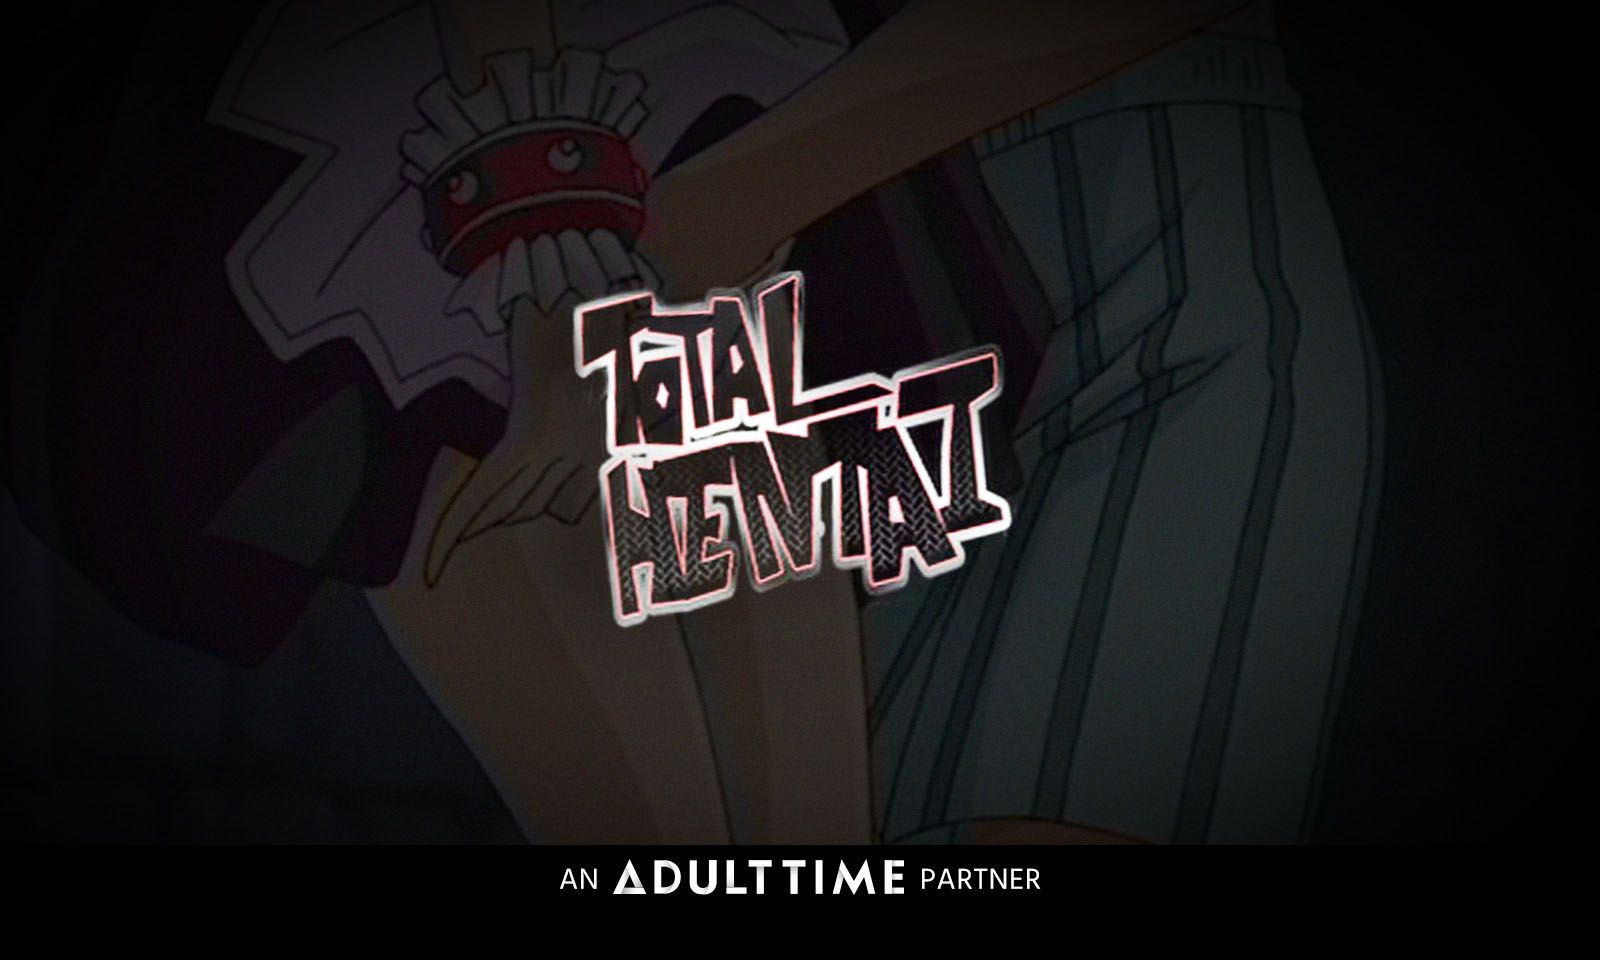 Adult Time Partners With Anime Studio Total Hentai